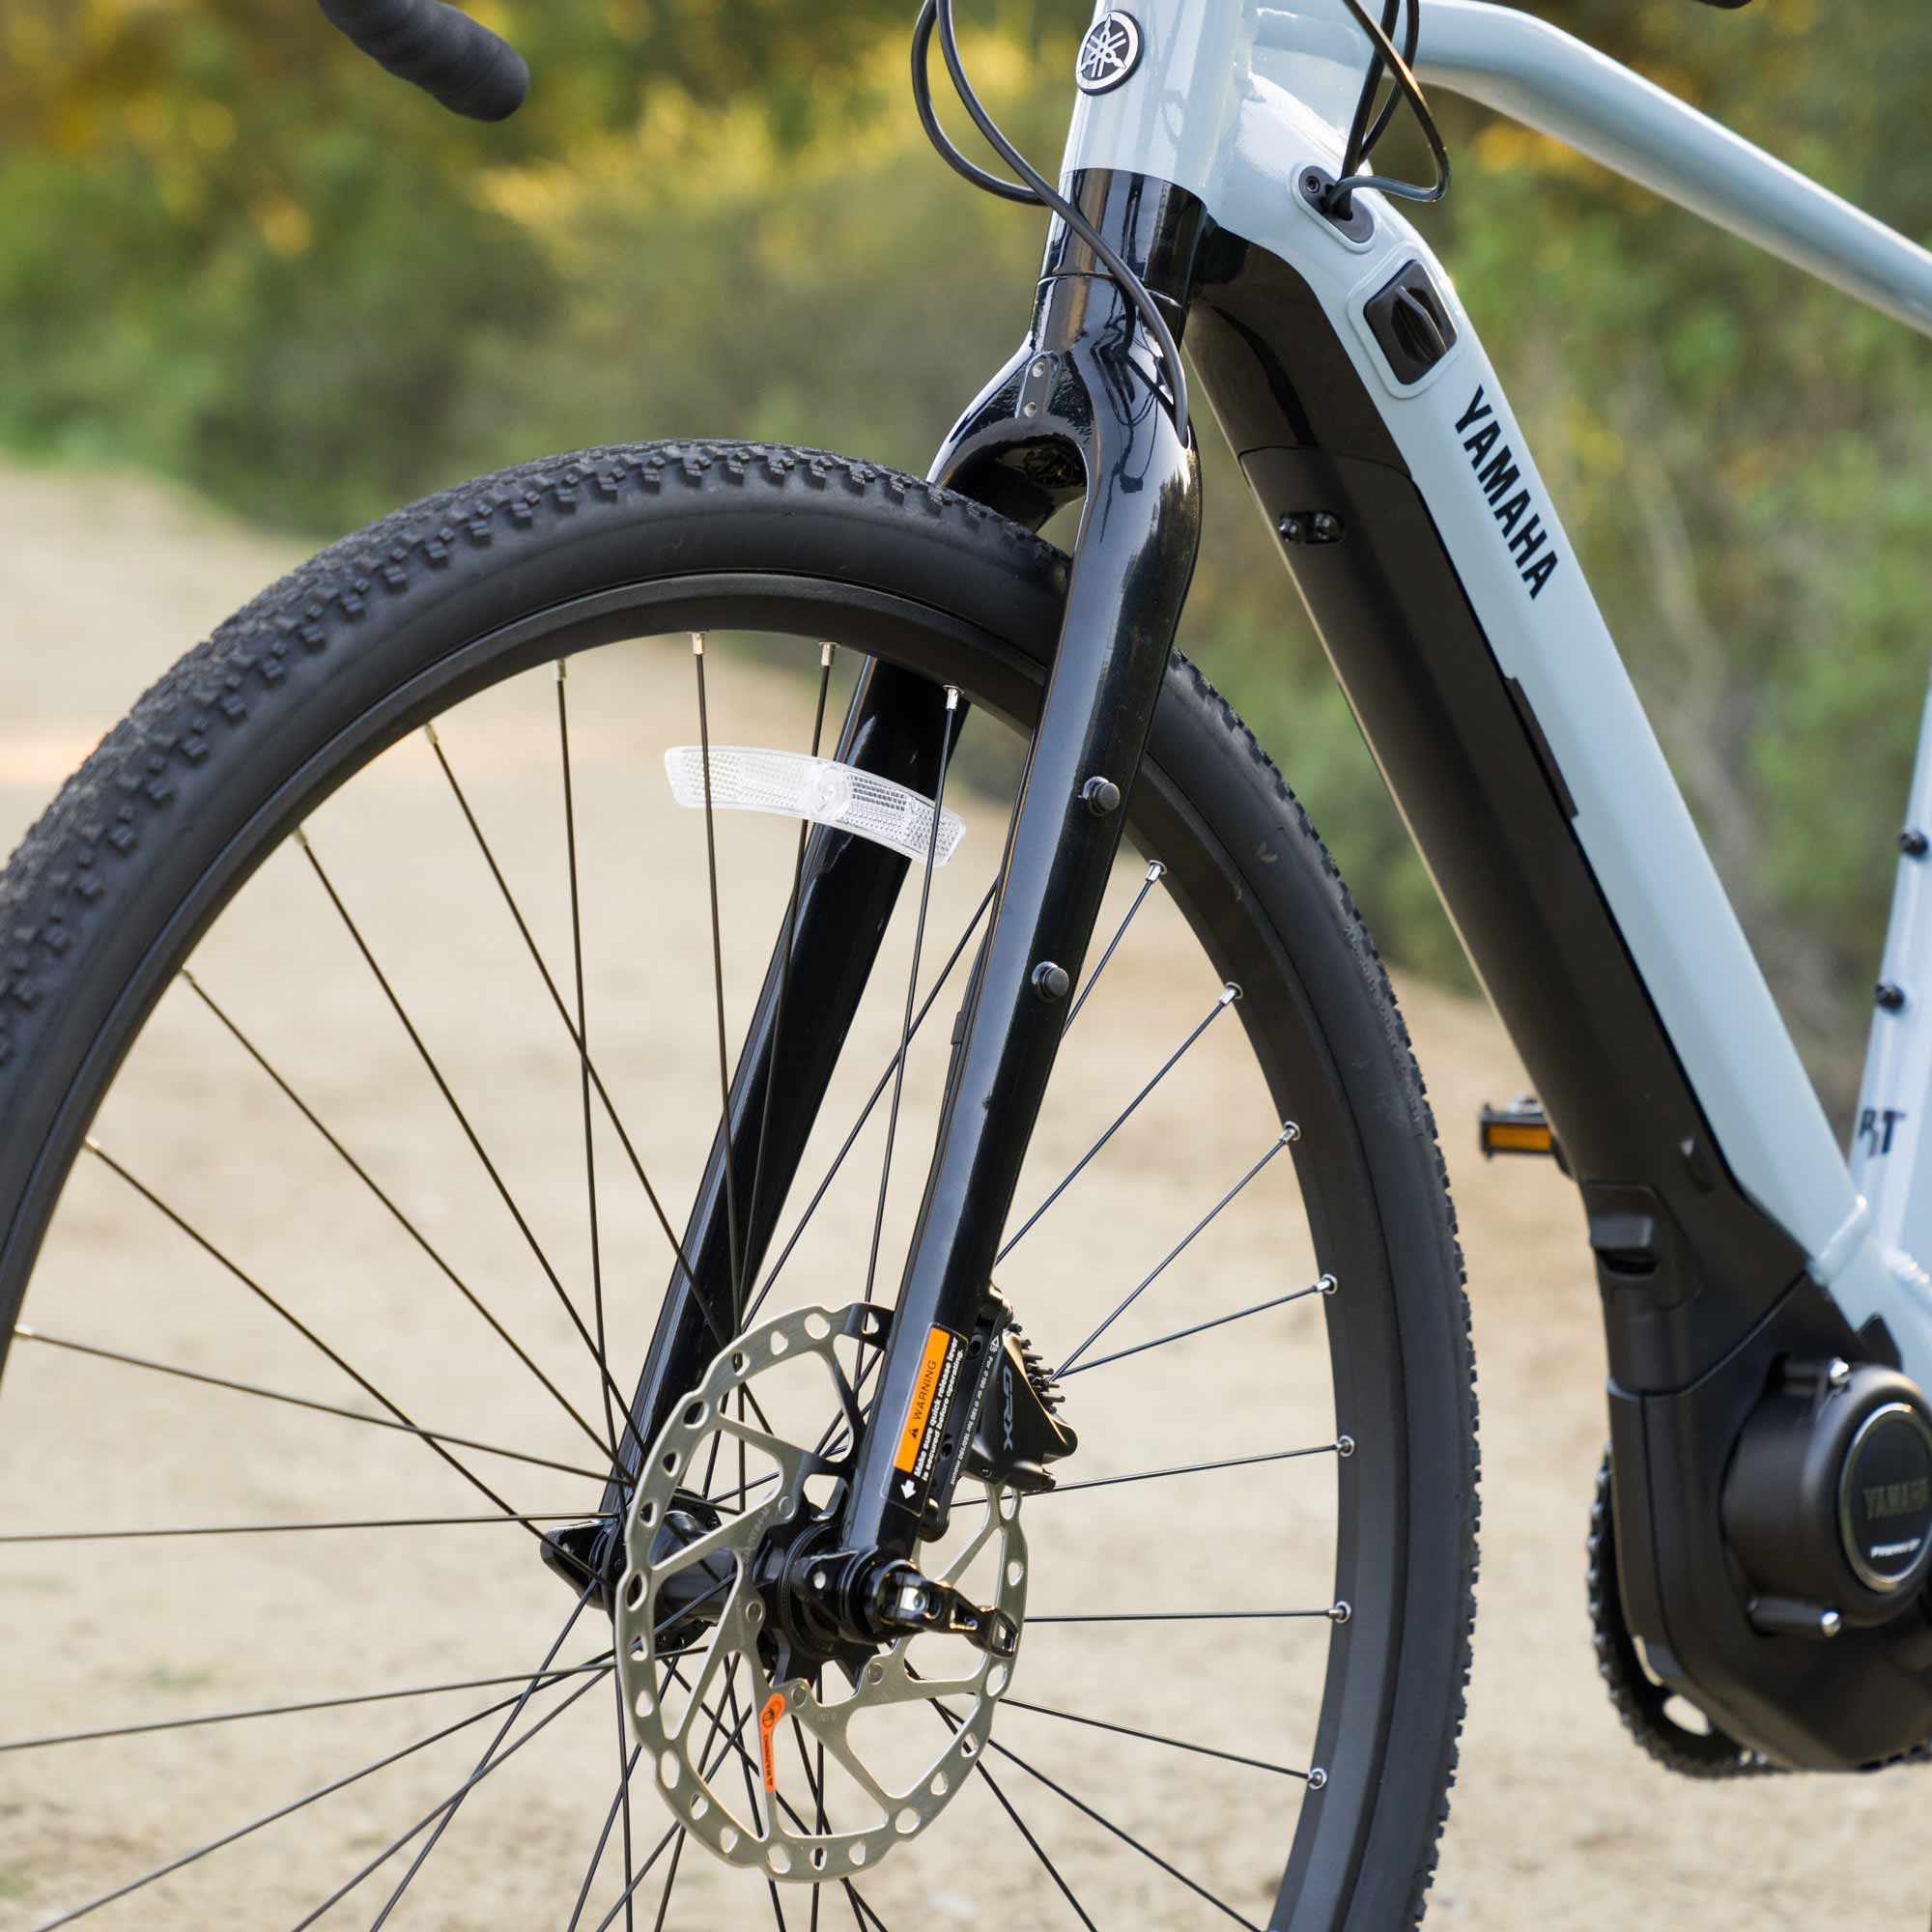 The gummy Maxxis tires offer trials bike-like grip over loose terrain.